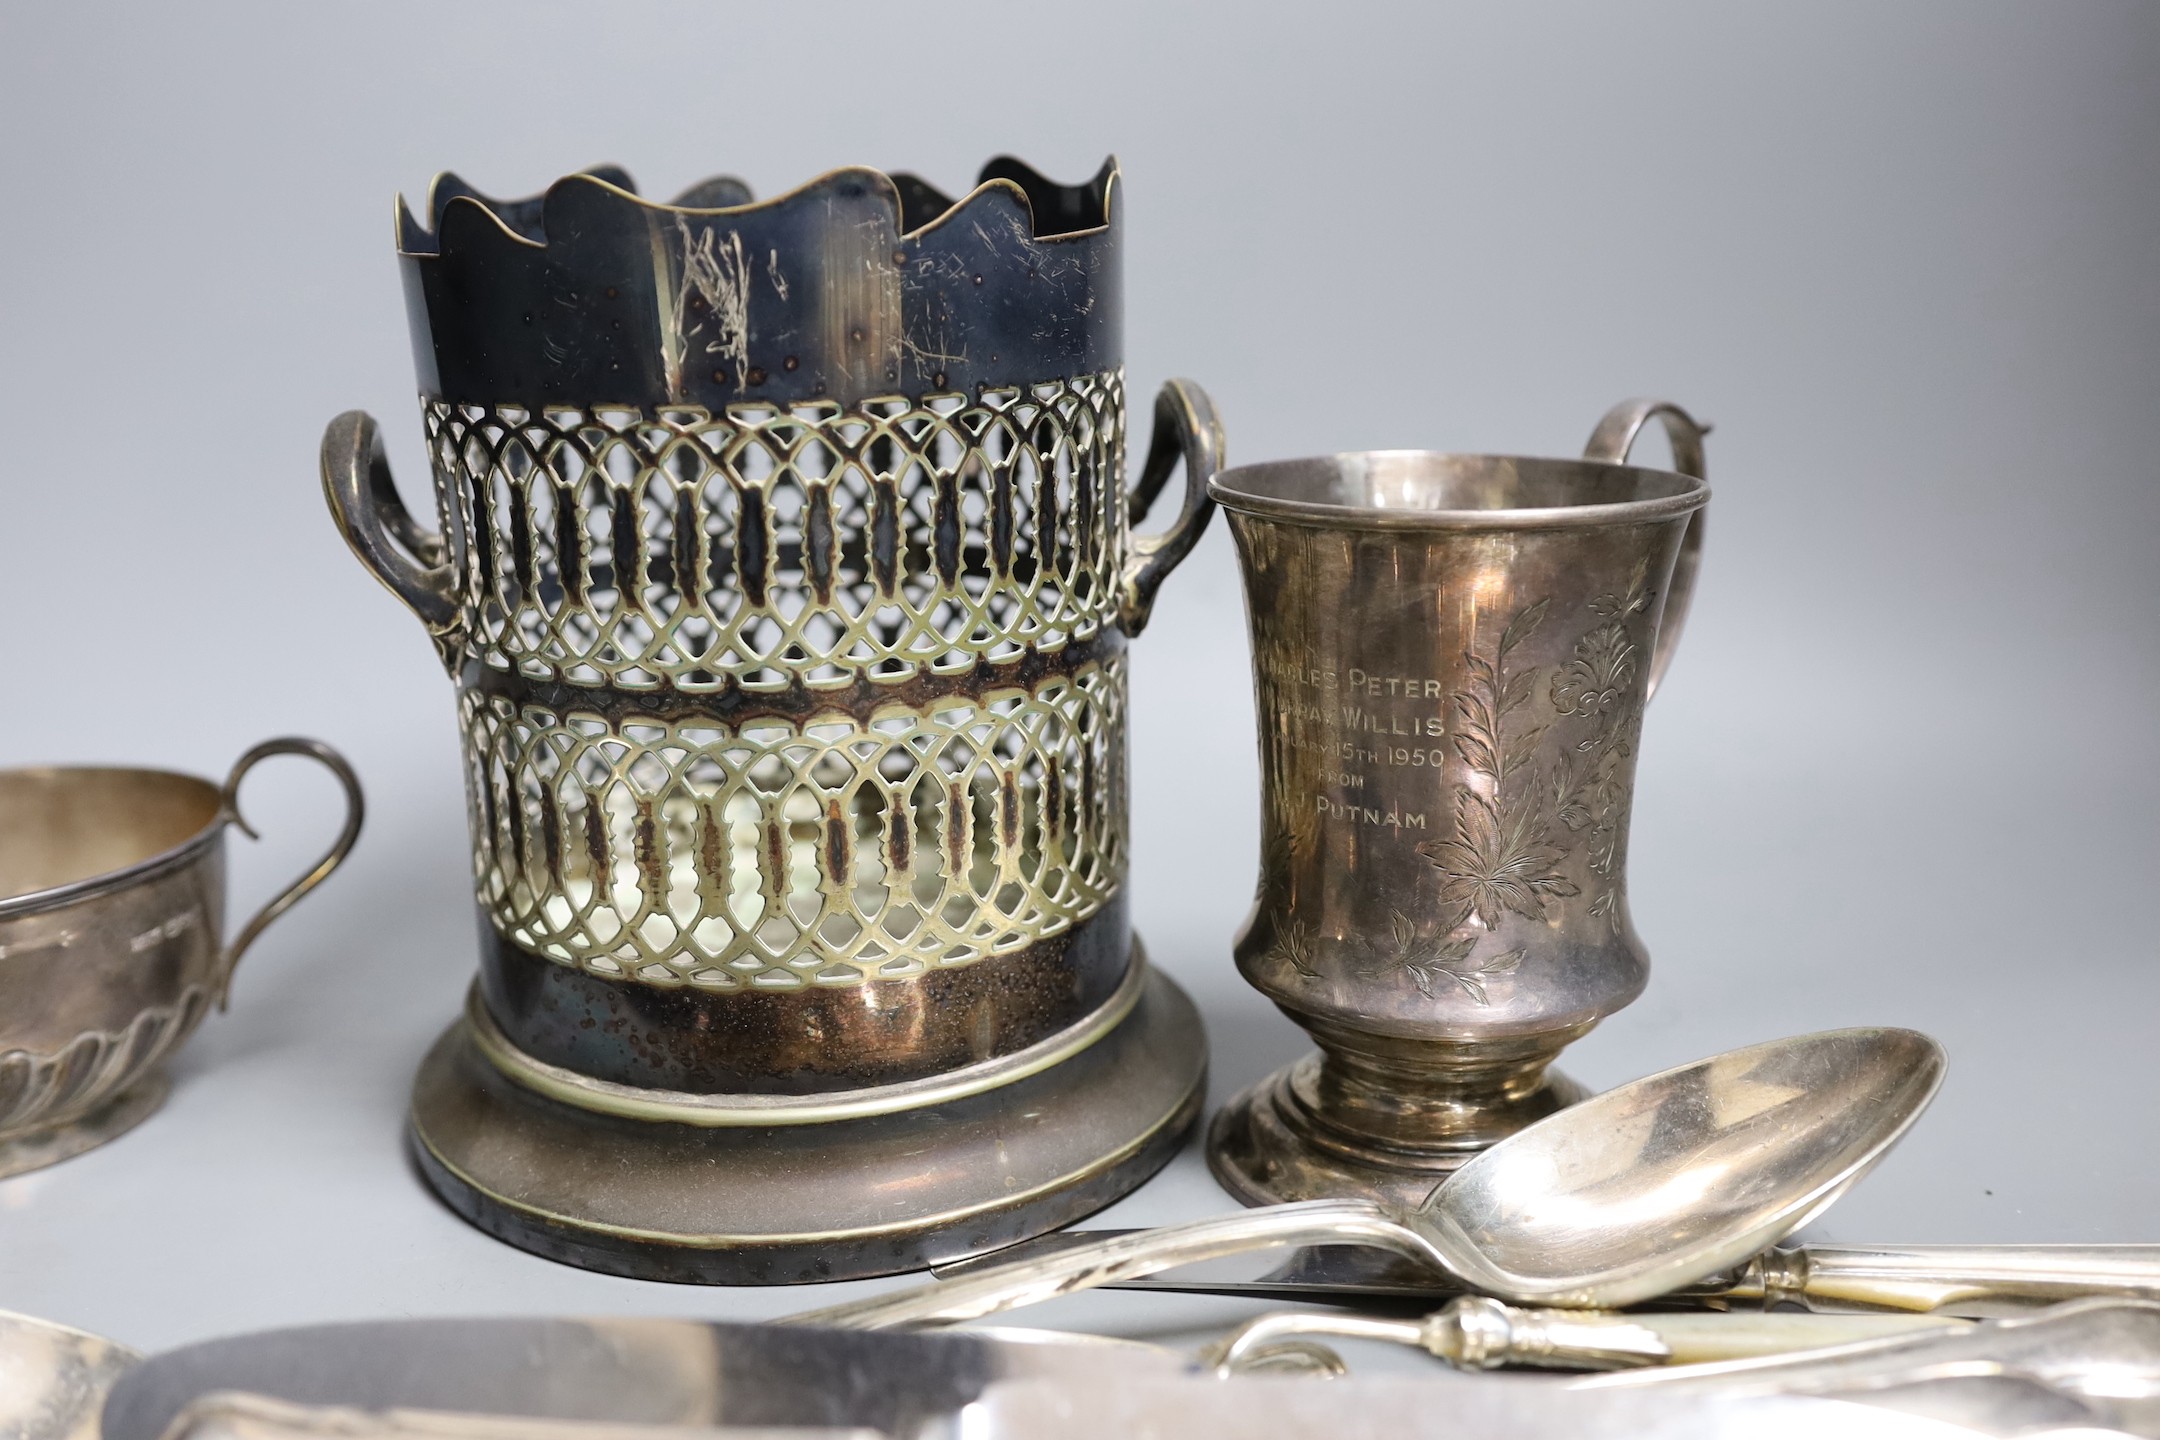 An Edwardian silver christening mug, with later engraved inscription, Birmingham, 1902, a silver two handed bowl, a plated syphon stand and a quantty of silver plated handled table knives etc.